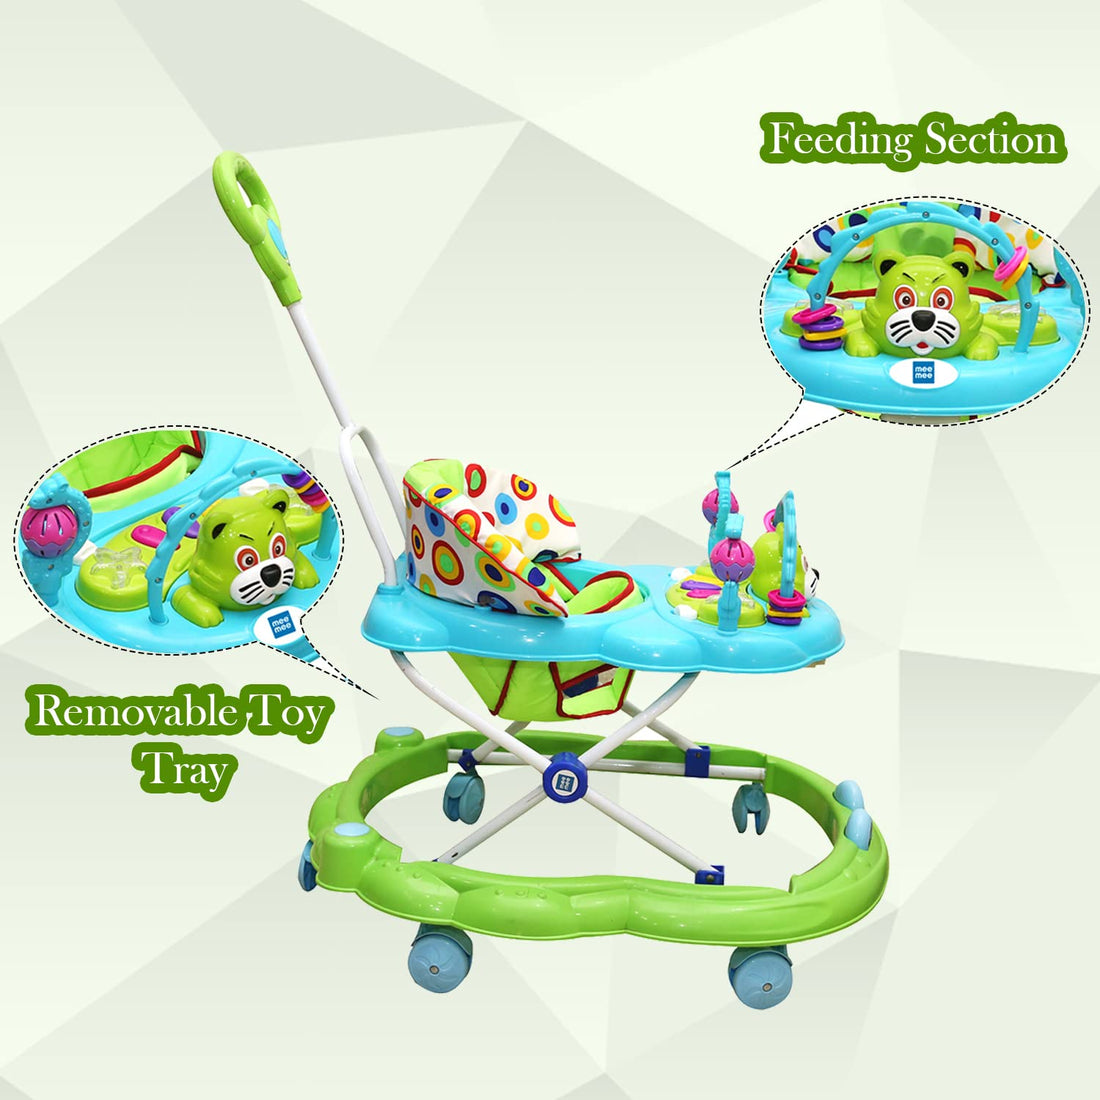 Mee Mee - Baby Walker with Feeding Section Functionality